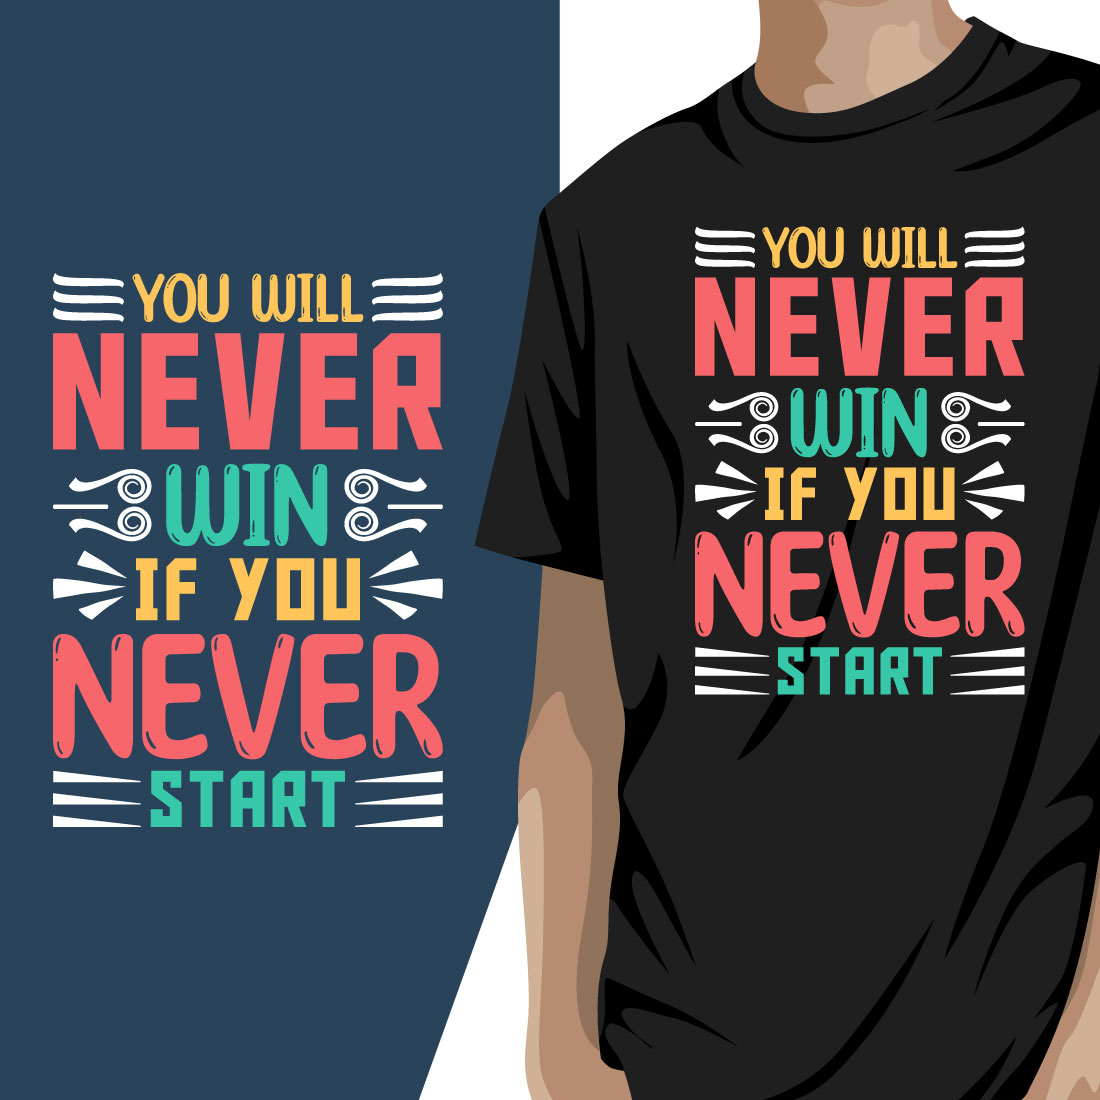 You Will Never Win If You Never Start " Motivational T shirt Design" cover image.